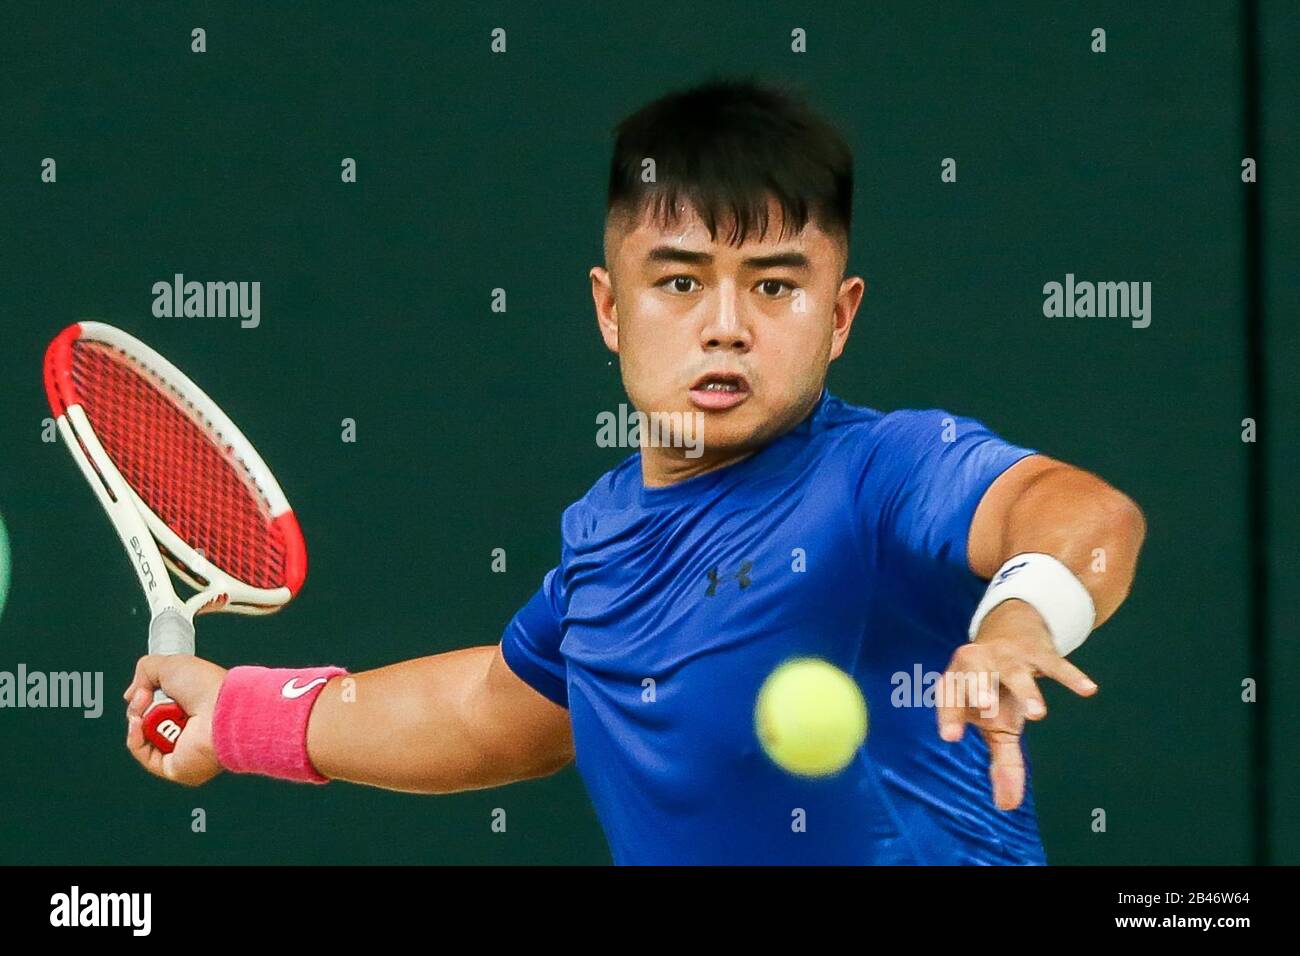 Manila. 6th Mar, 2020. Alberto Lim of the Philippines returns the ball during the singles match against Stefanos Tsitsipas of Greece at Davis Cup World Group II play-off round between the Philippines and Greece in Manila, the Philippines on March 6, 2020. Credit: Rouelle Umali/Xinhua/Alamy Live News Stock Photo